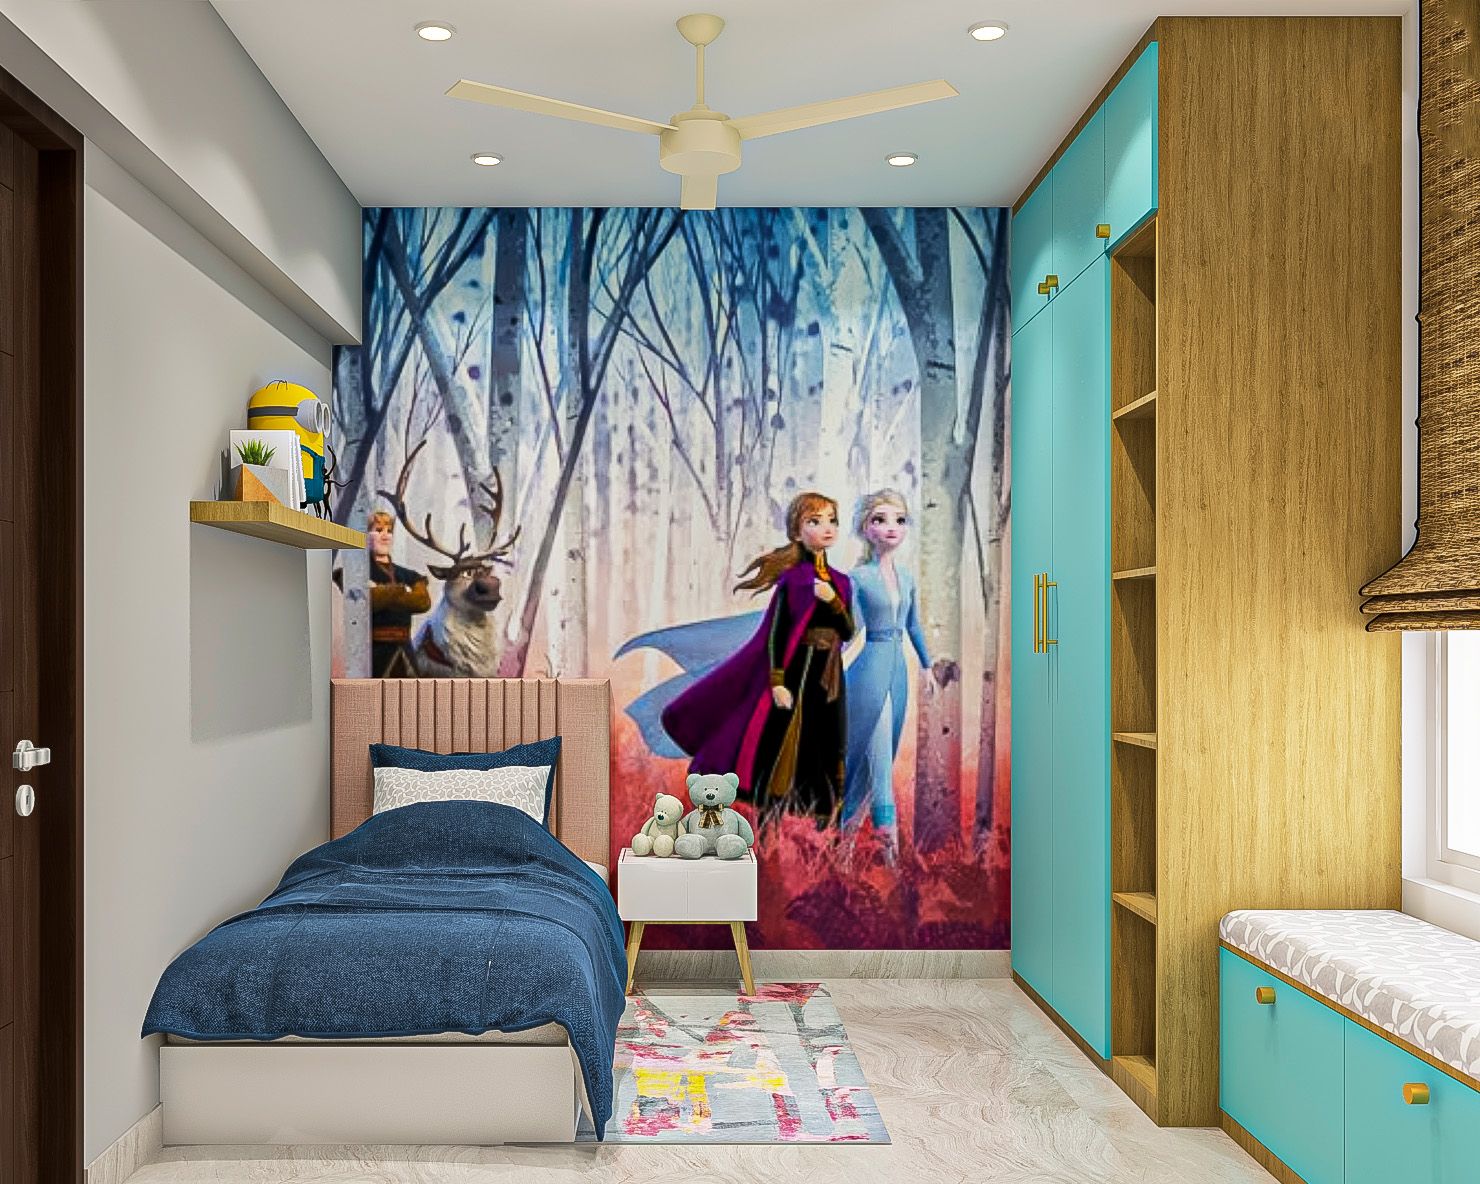 Modern Kids Room Design With A Single Bed And Window Bay Seating